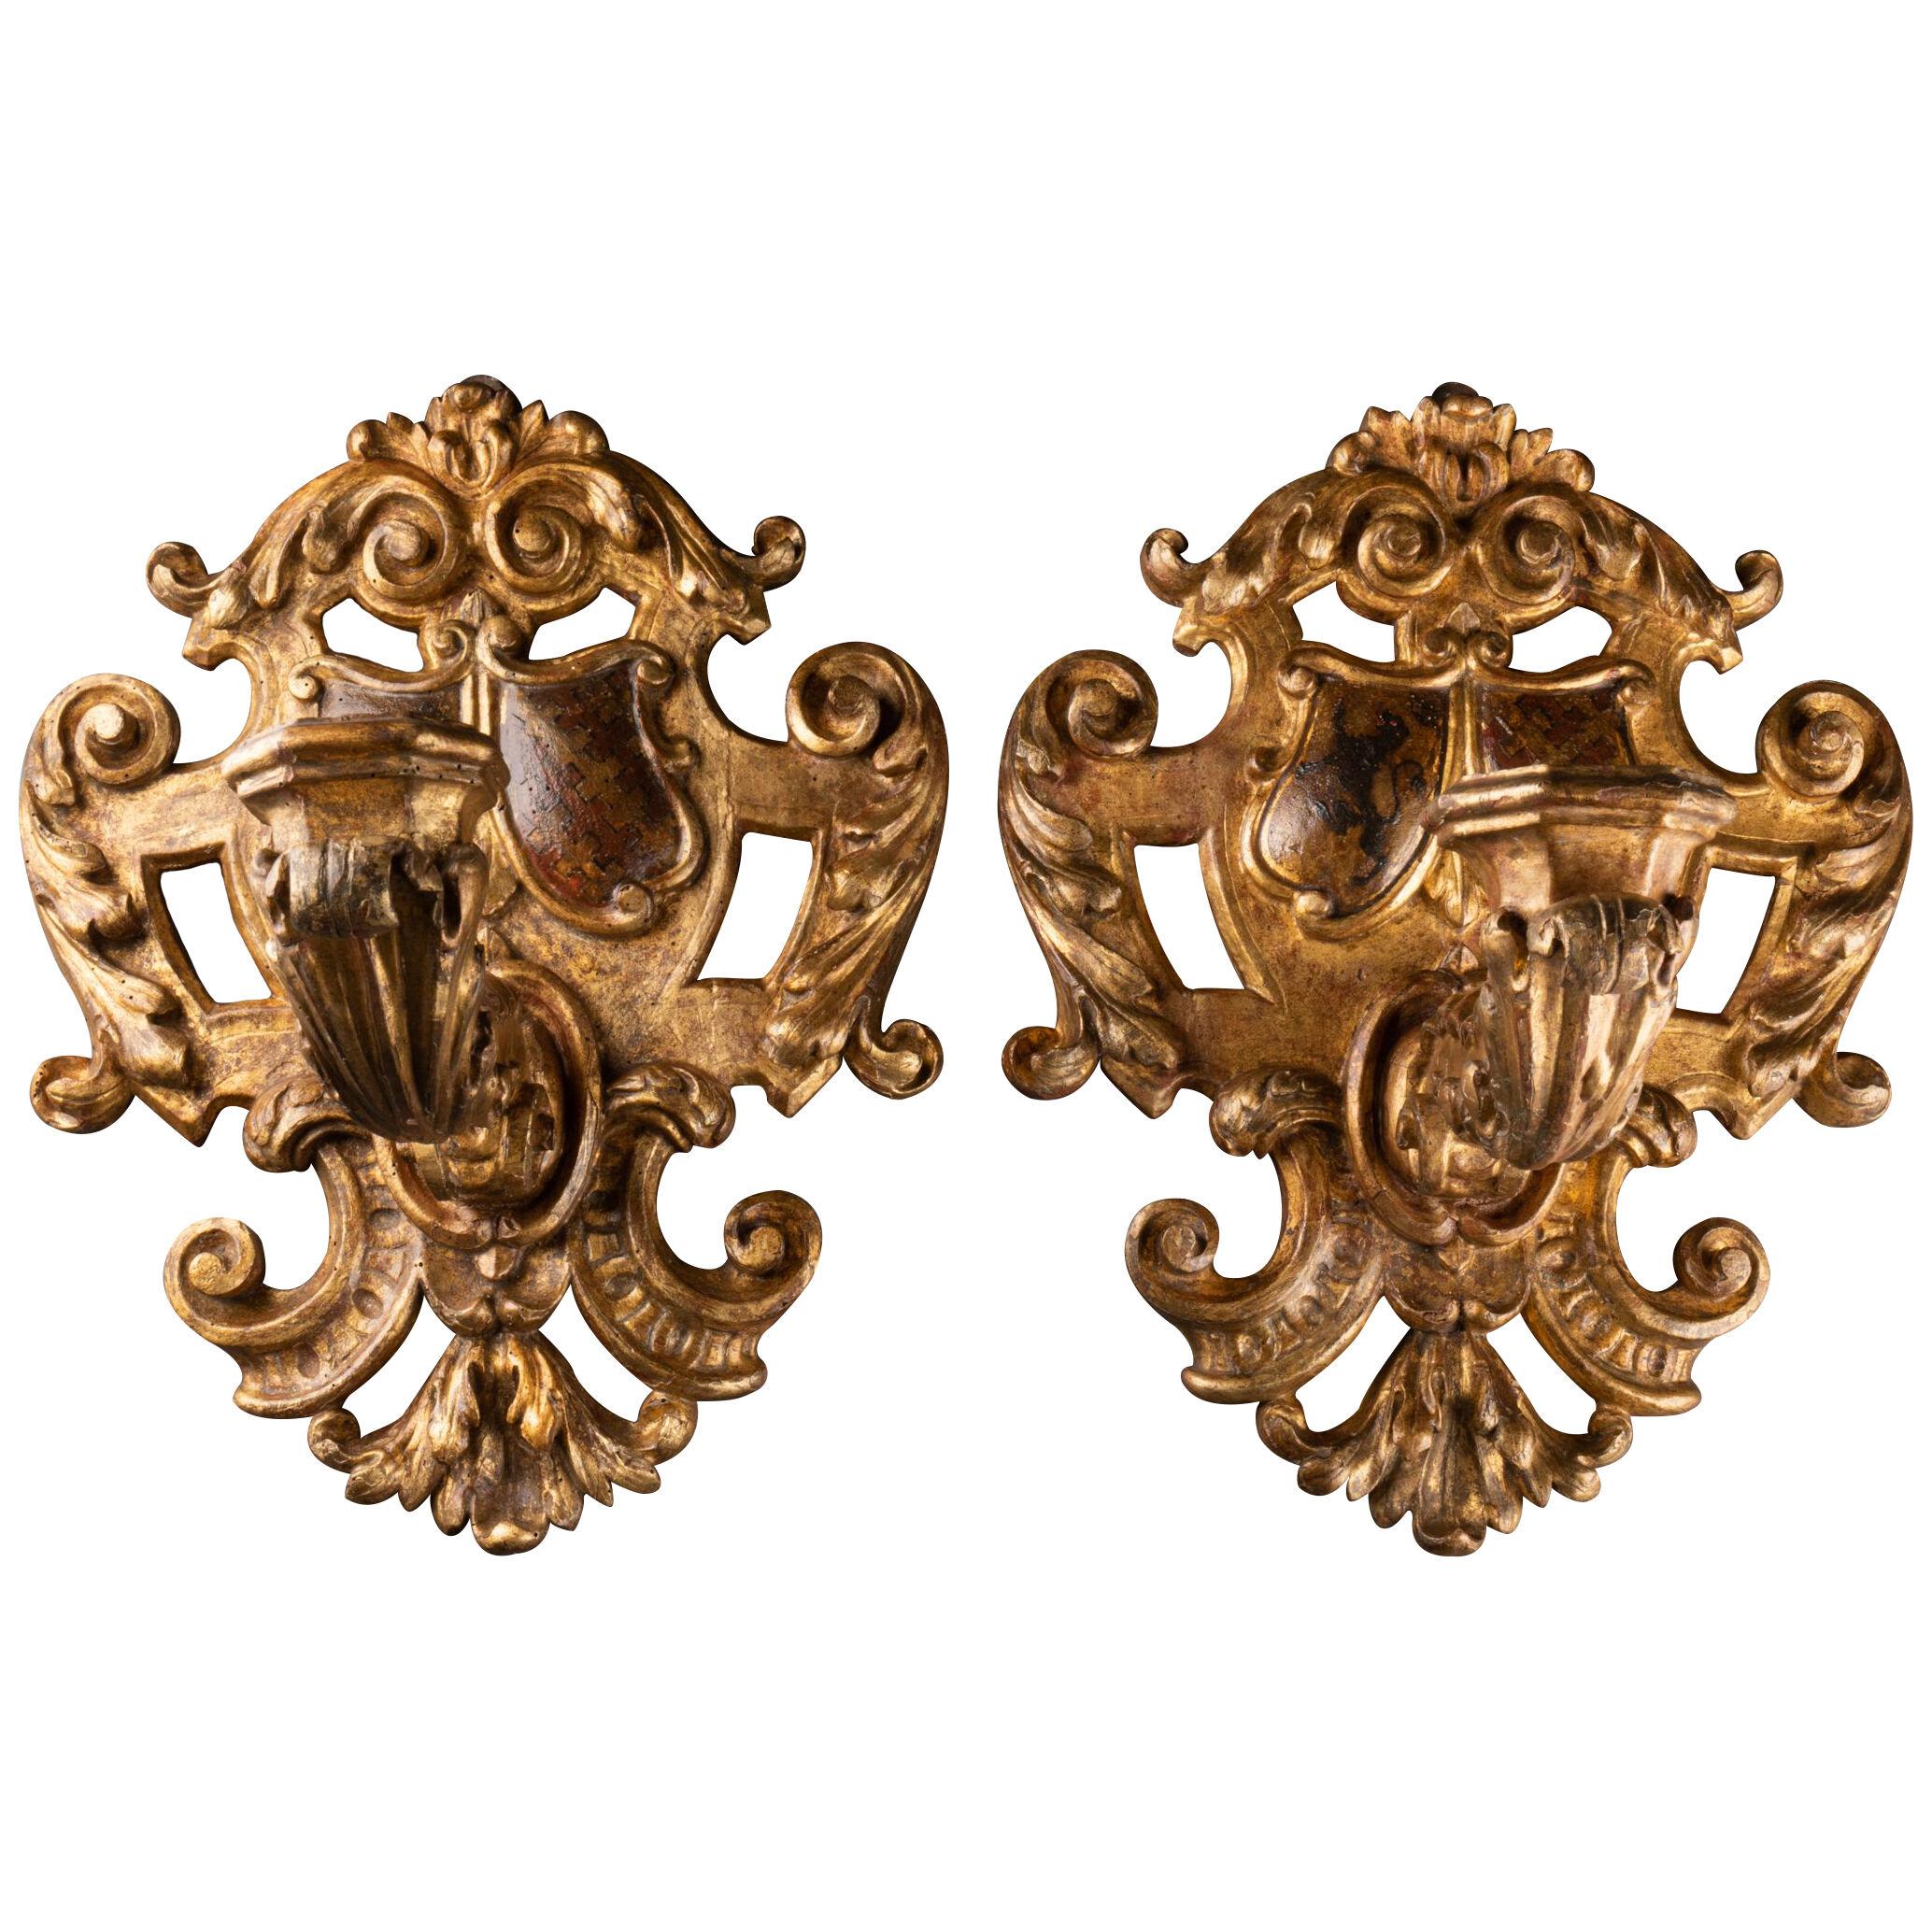 Pair of armorial sconces Gilded wood and polychromy – Italy - 17th century